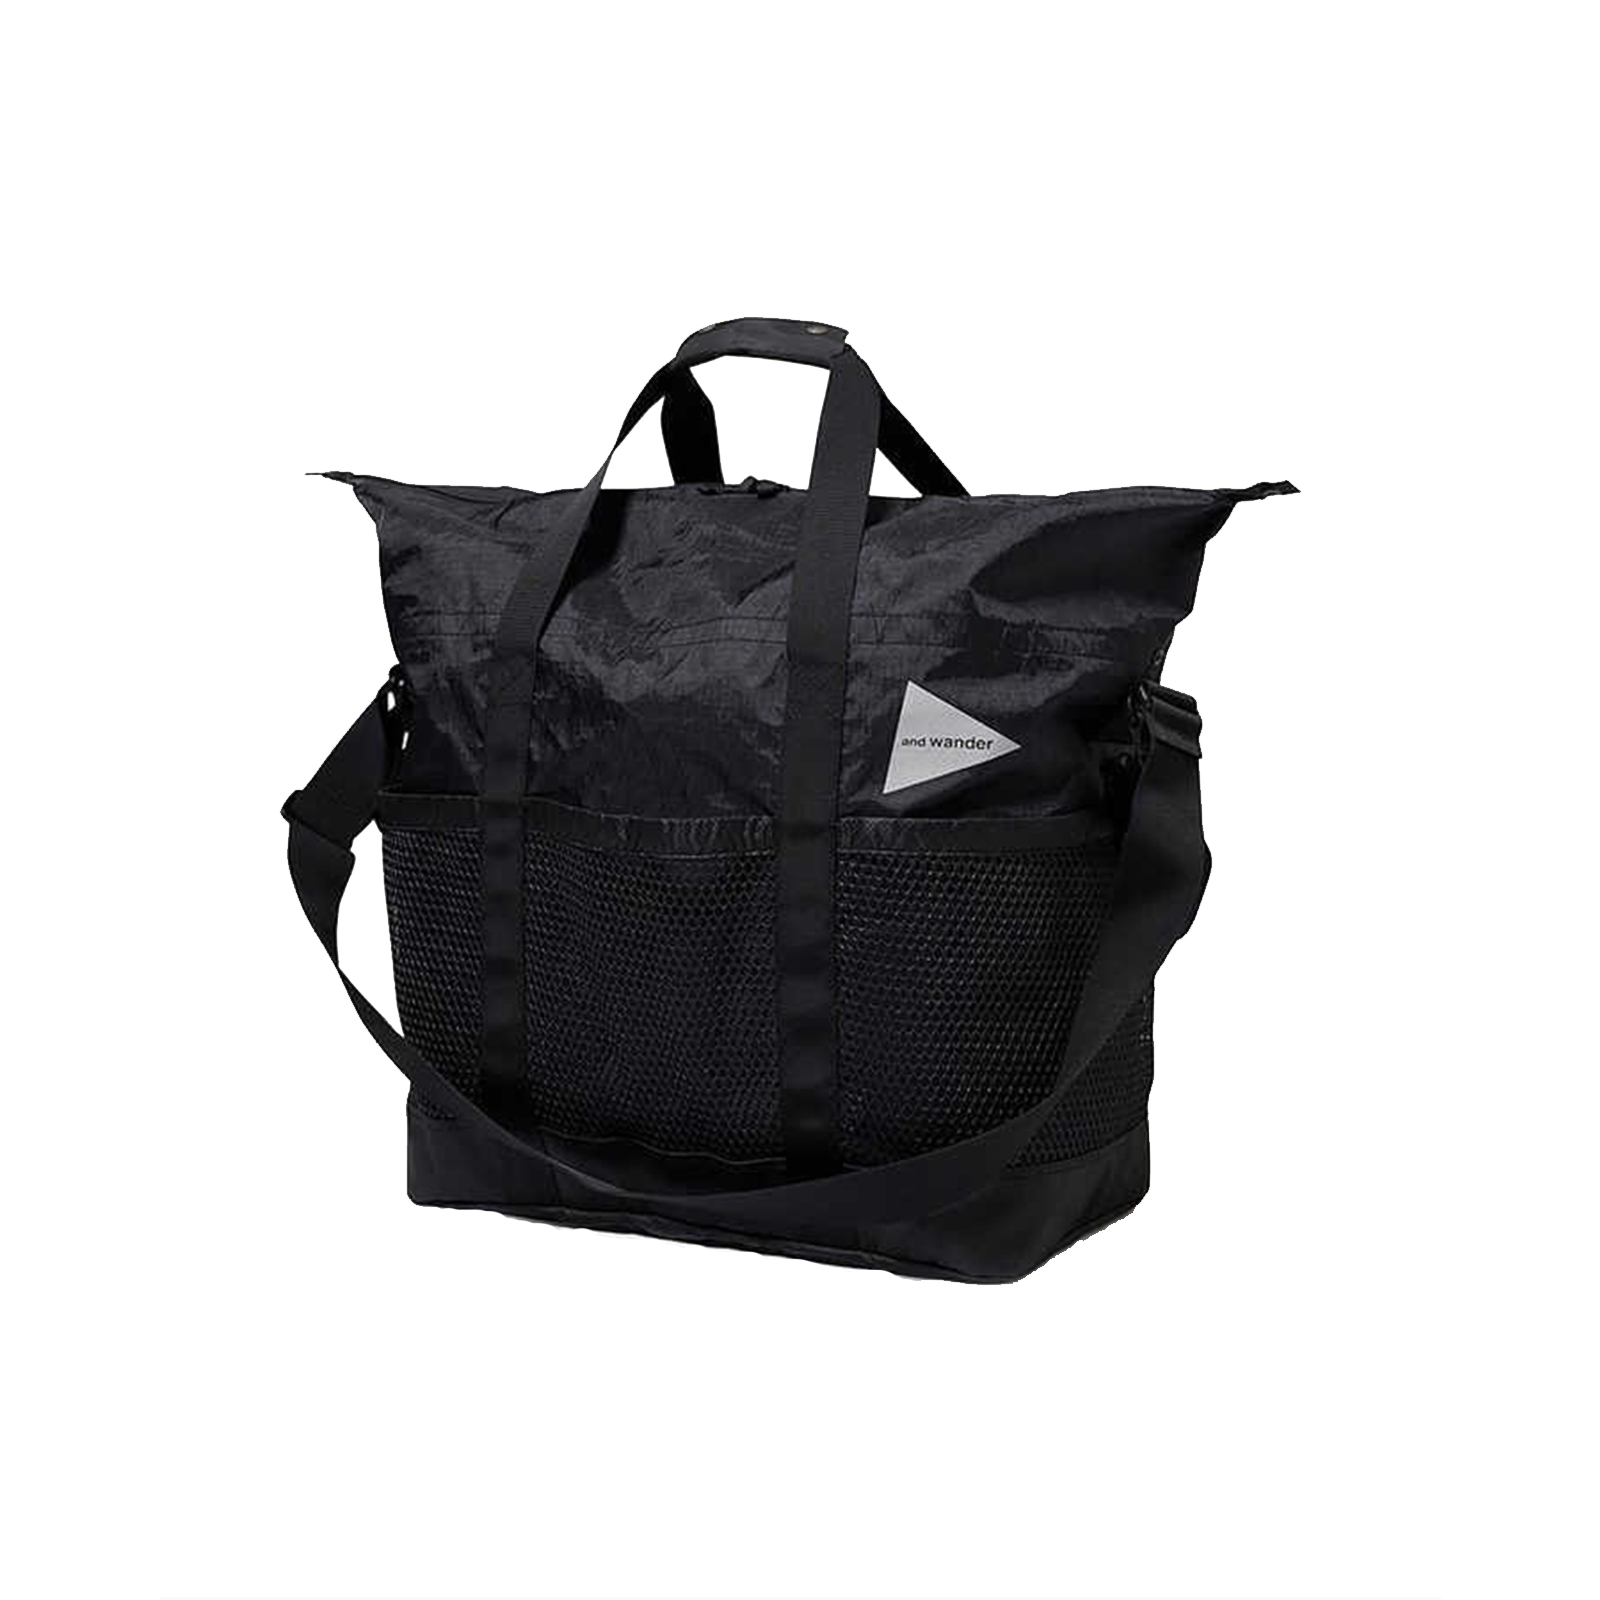 and wander X-Pac 45L Tote Bag